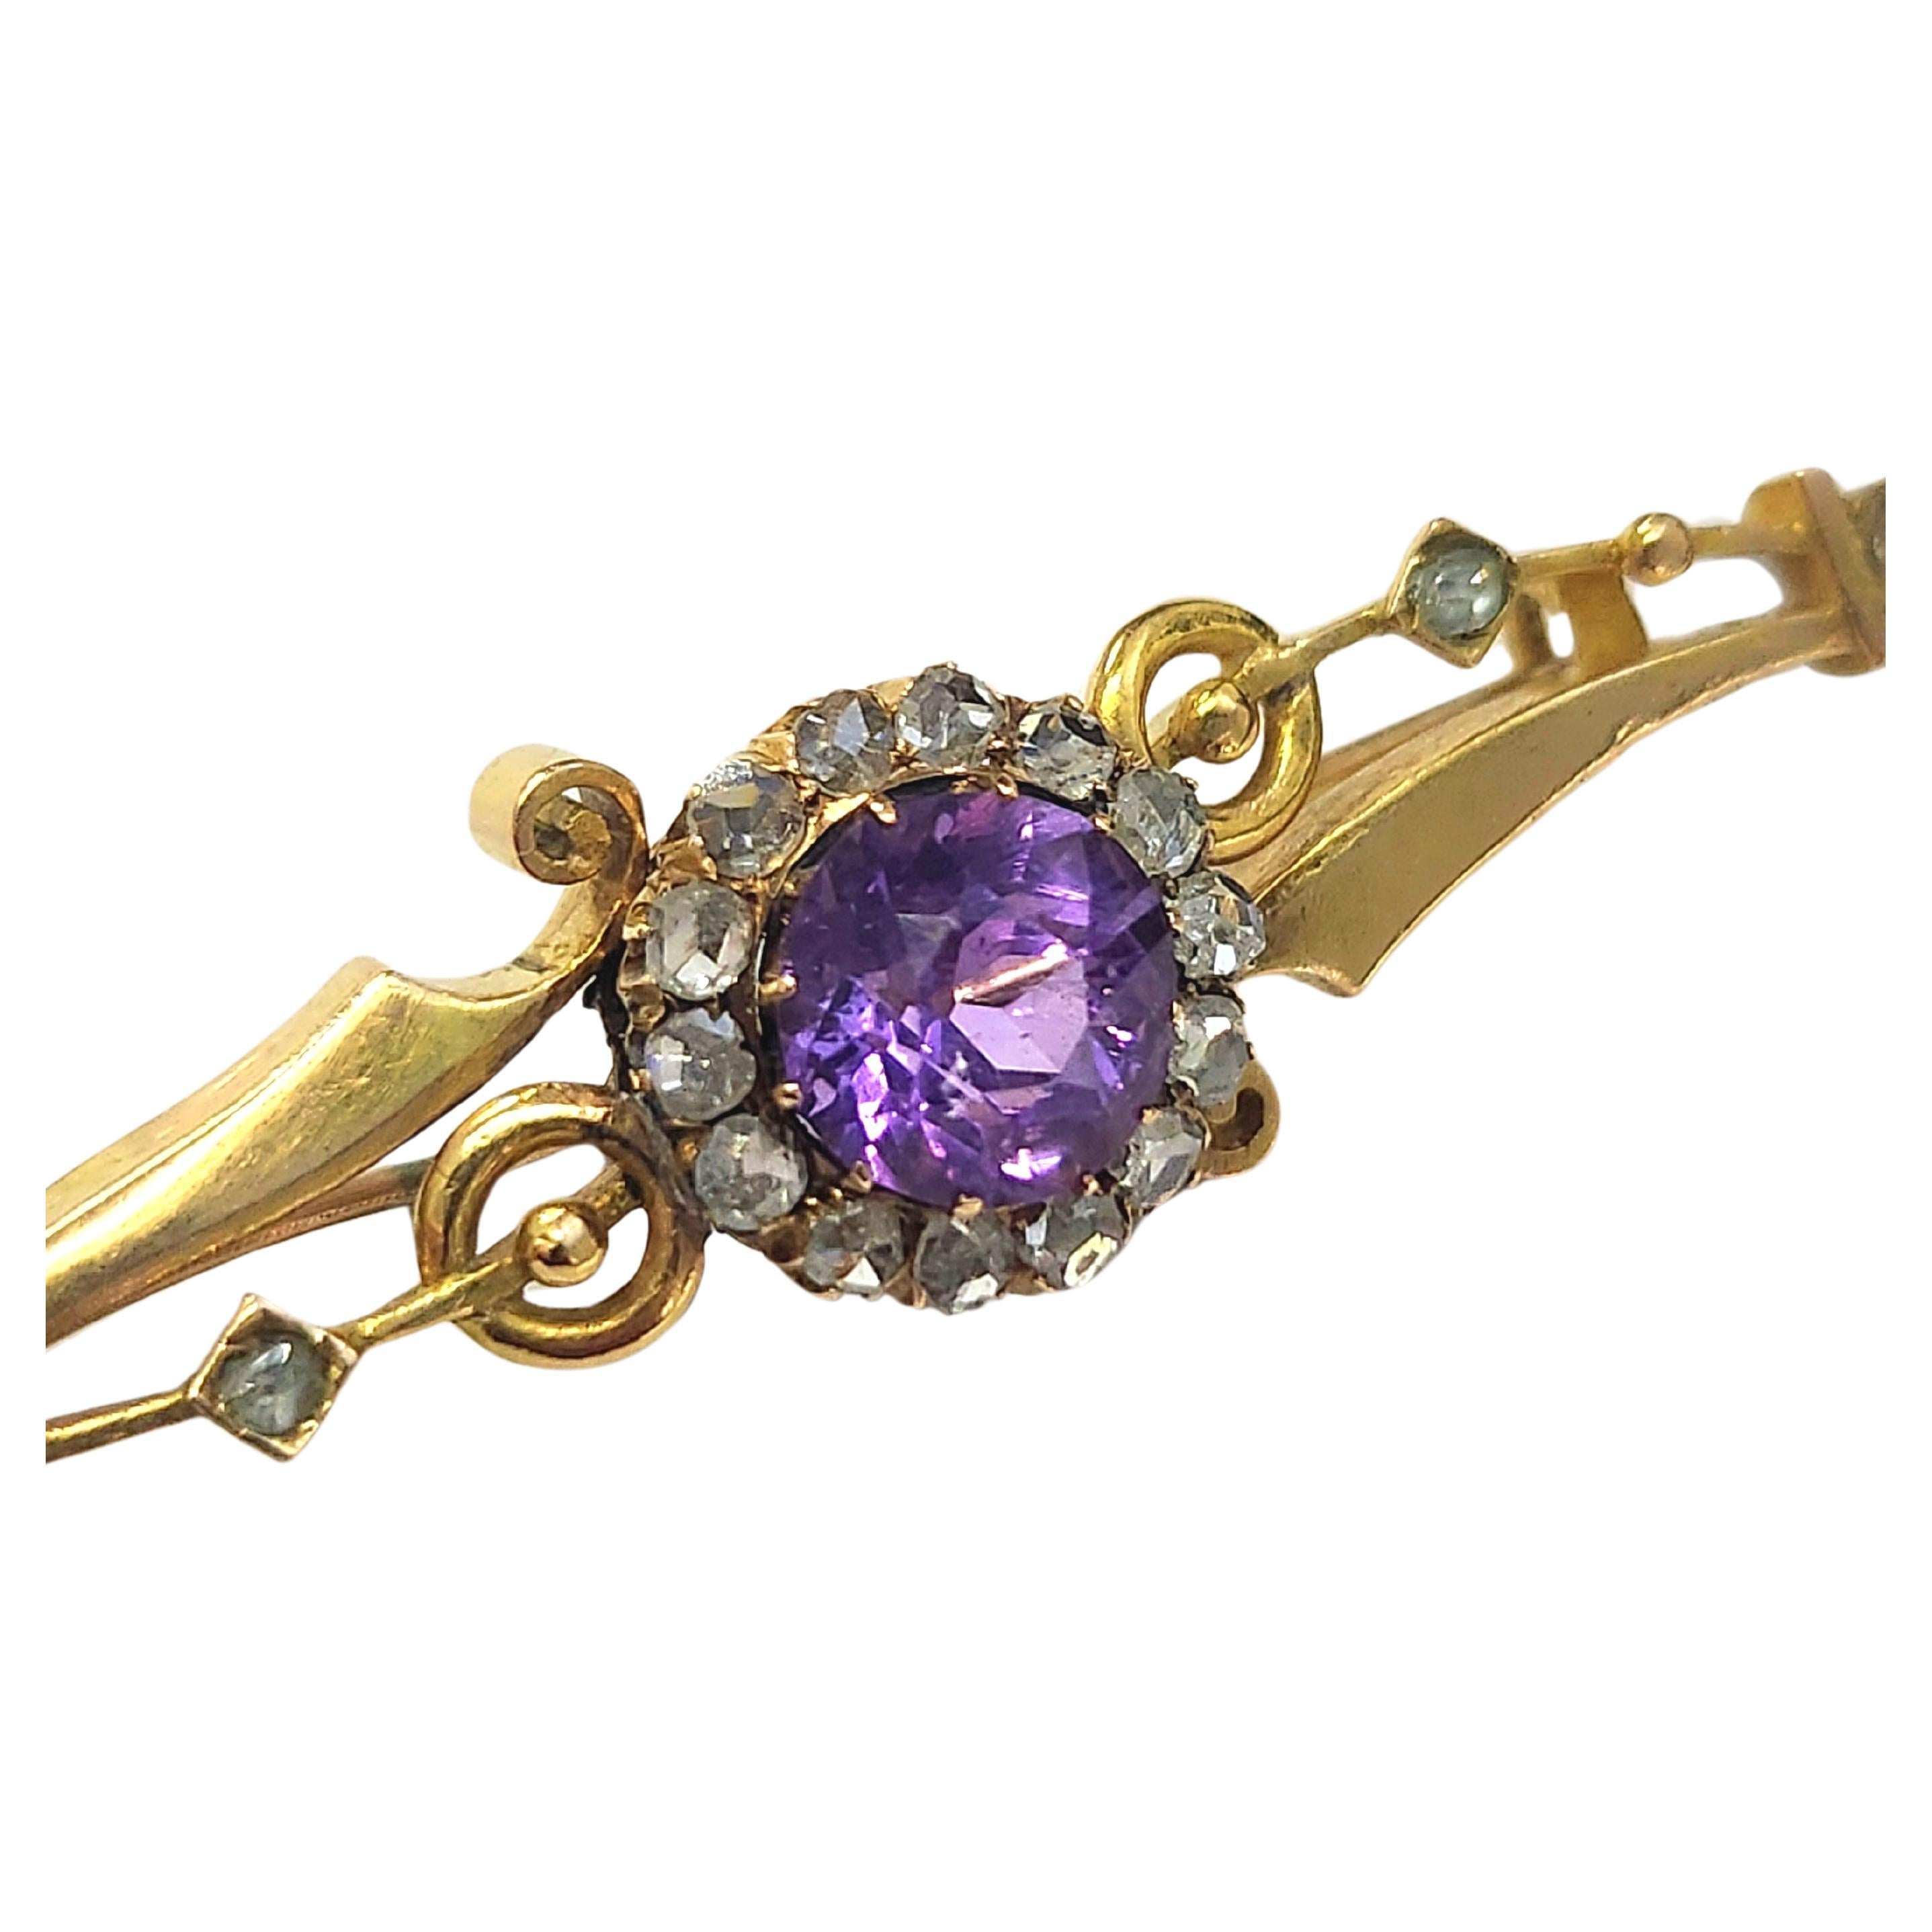 Antique russian 14k gold brooch centered with cybrian amethyst flanked with rose cut diamonds made during the imperial russian era 1900/1907s hall marked 56 imperial russian gold standard 